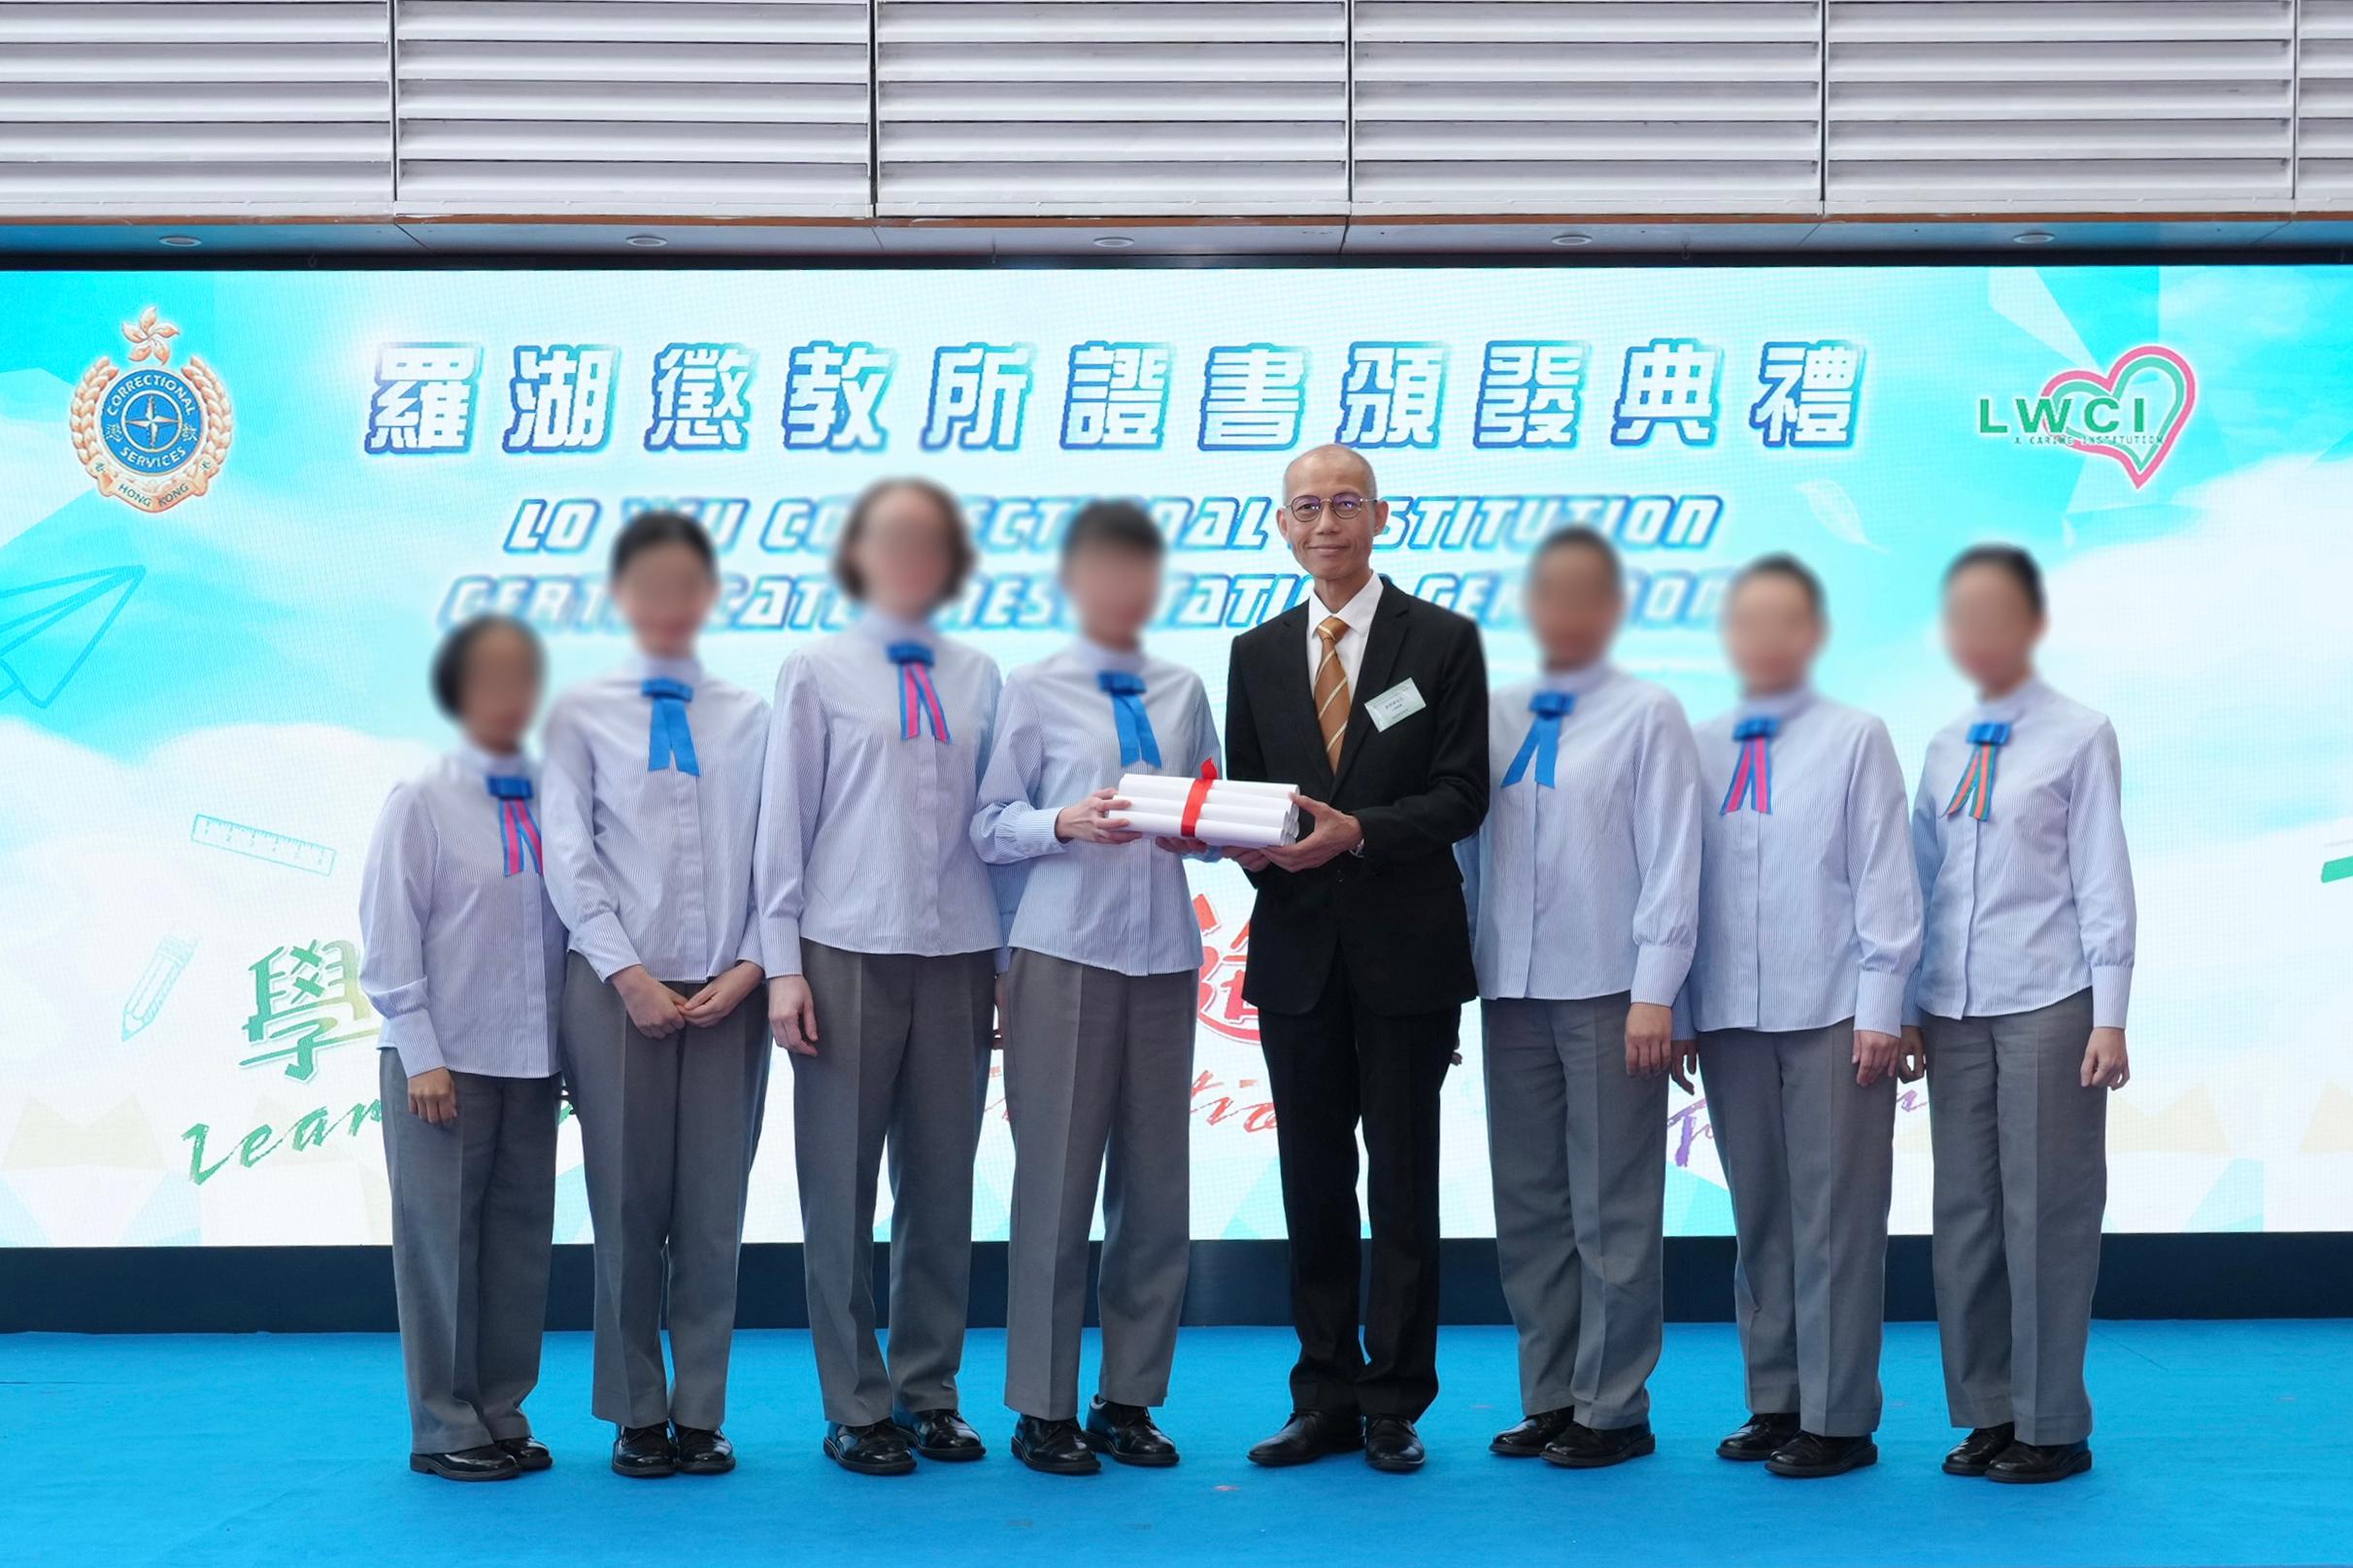 Persons in custody at Lo Wu Correctional Institution of the Correctional Services Department were presented with certificates at a ceremony today (March 20) in recognition of their continuous efforts in pursuing further studies. Photo shows the Chairman of Tung Sin Tan, Mr Ha Tak-kin (fourth right), presenting certificates to persons in custody.